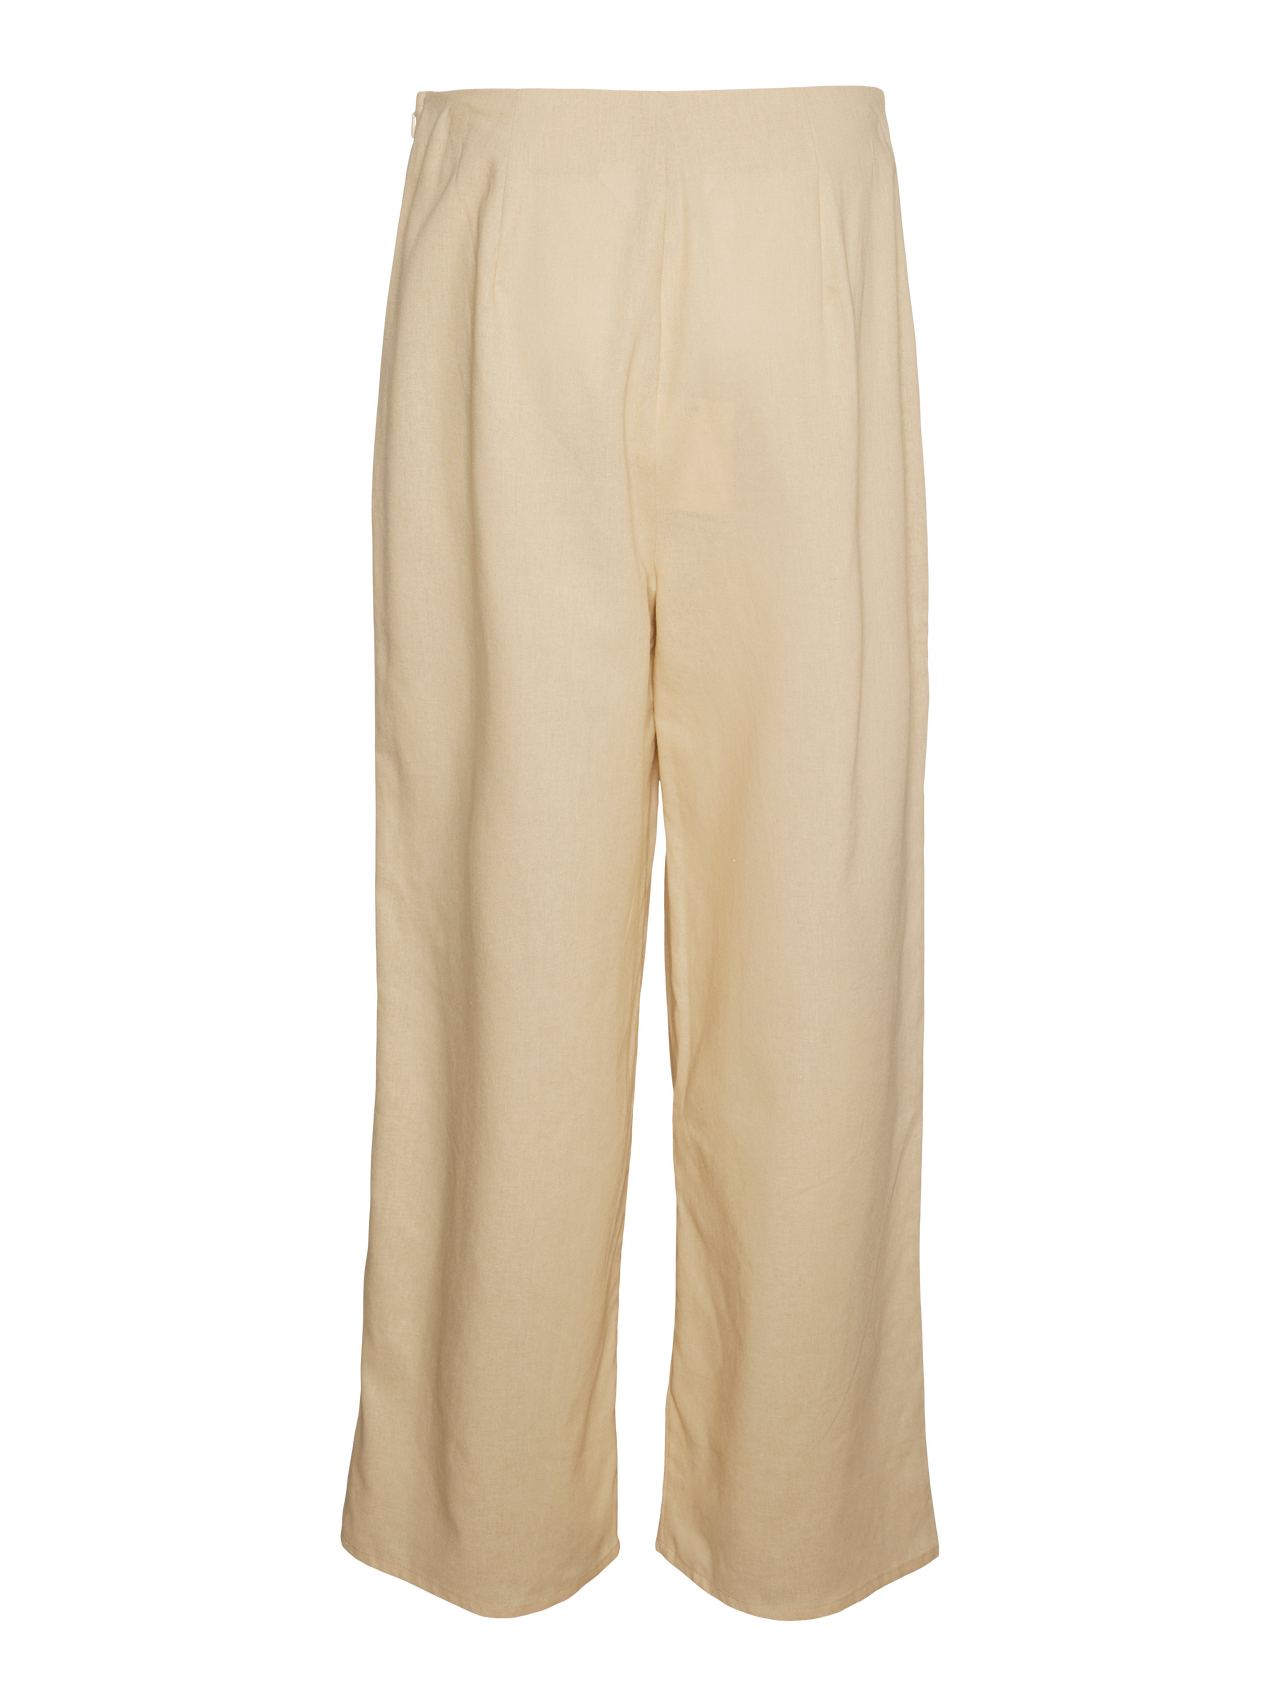 Vero Moda SOMETHINGNEW Styled by; Larissa Wehr Trousers -Marzipan - 10307844